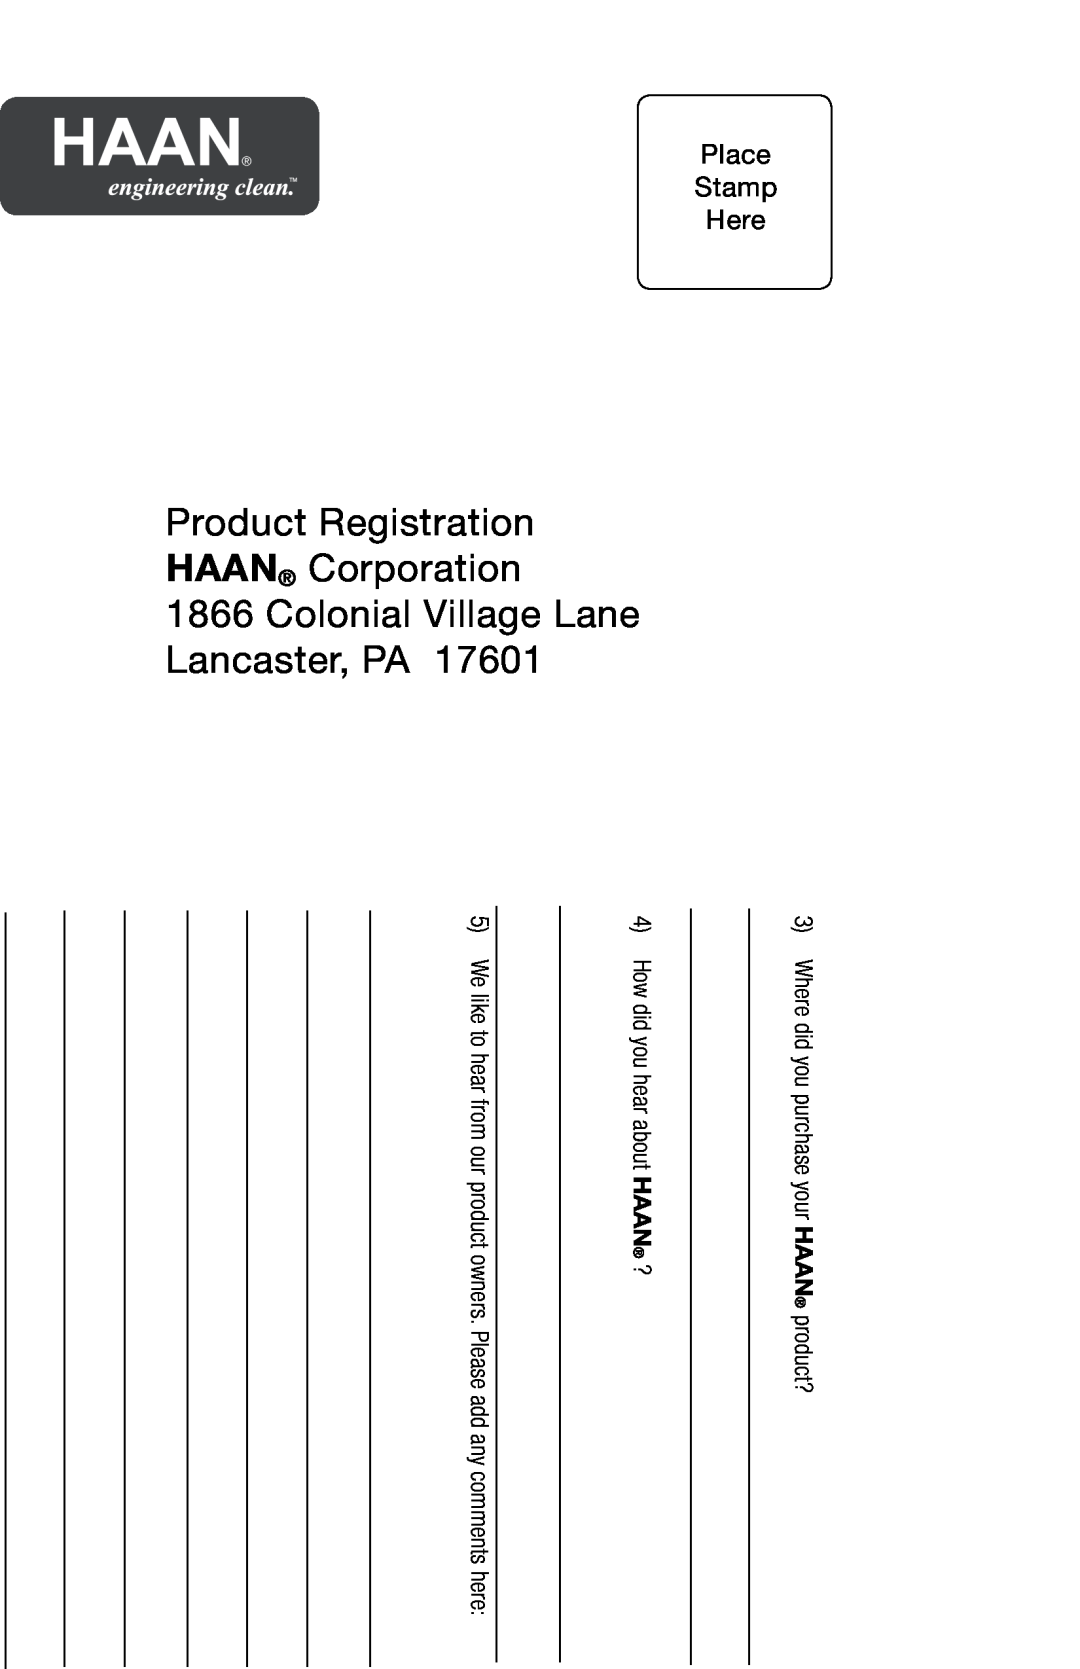 Haan HD-50 Product Registration HAAN Corporation, Colonial Village Lane Lancaster, PA, Place, Stamp, Here, N Aah 